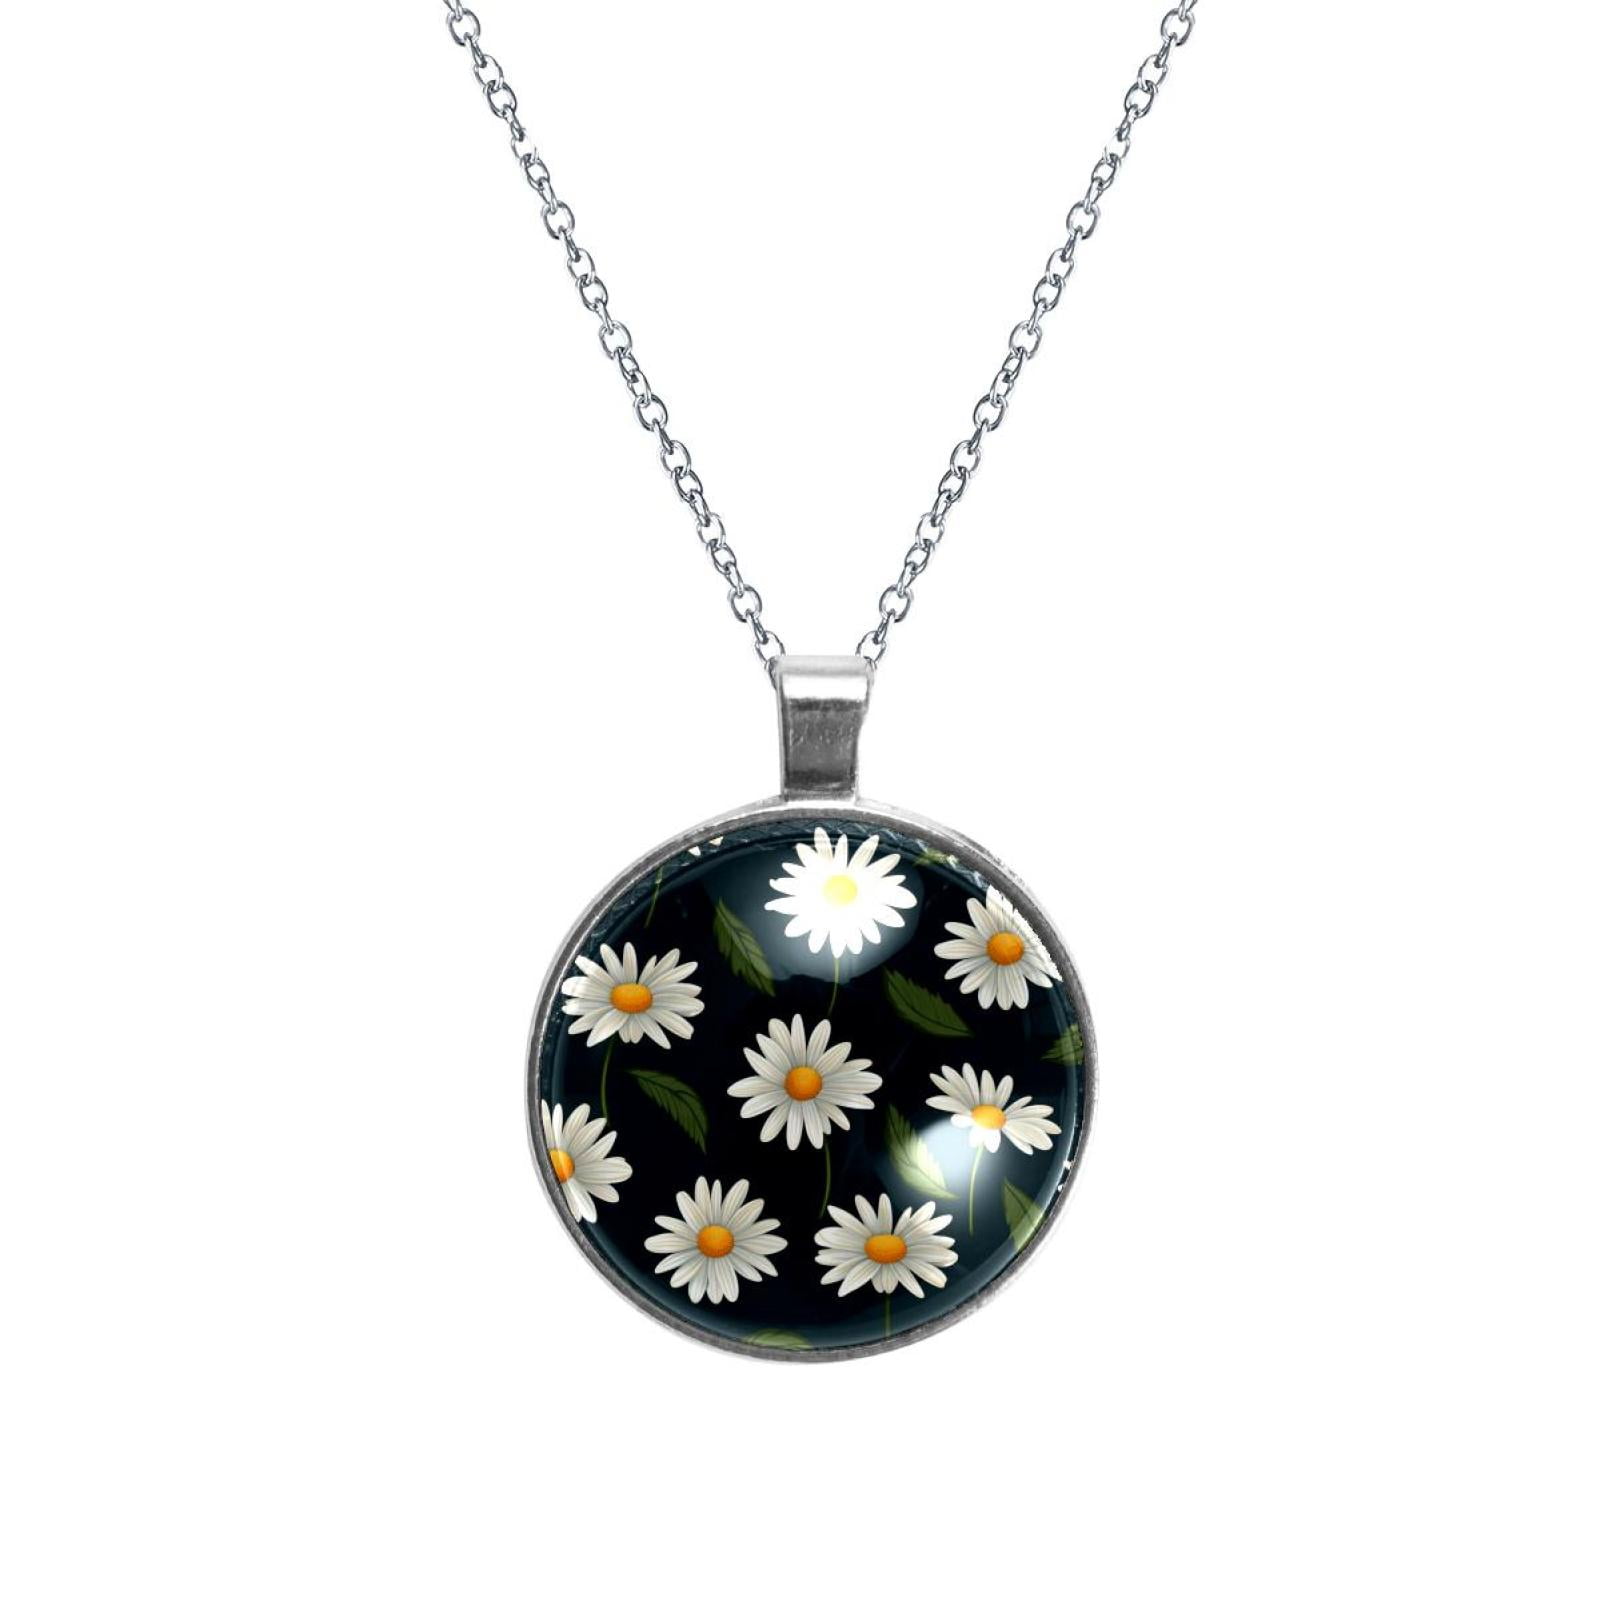 Daisy Glass Circular Pendant Necklace - Beautiful Handcrafted Jewelry ...